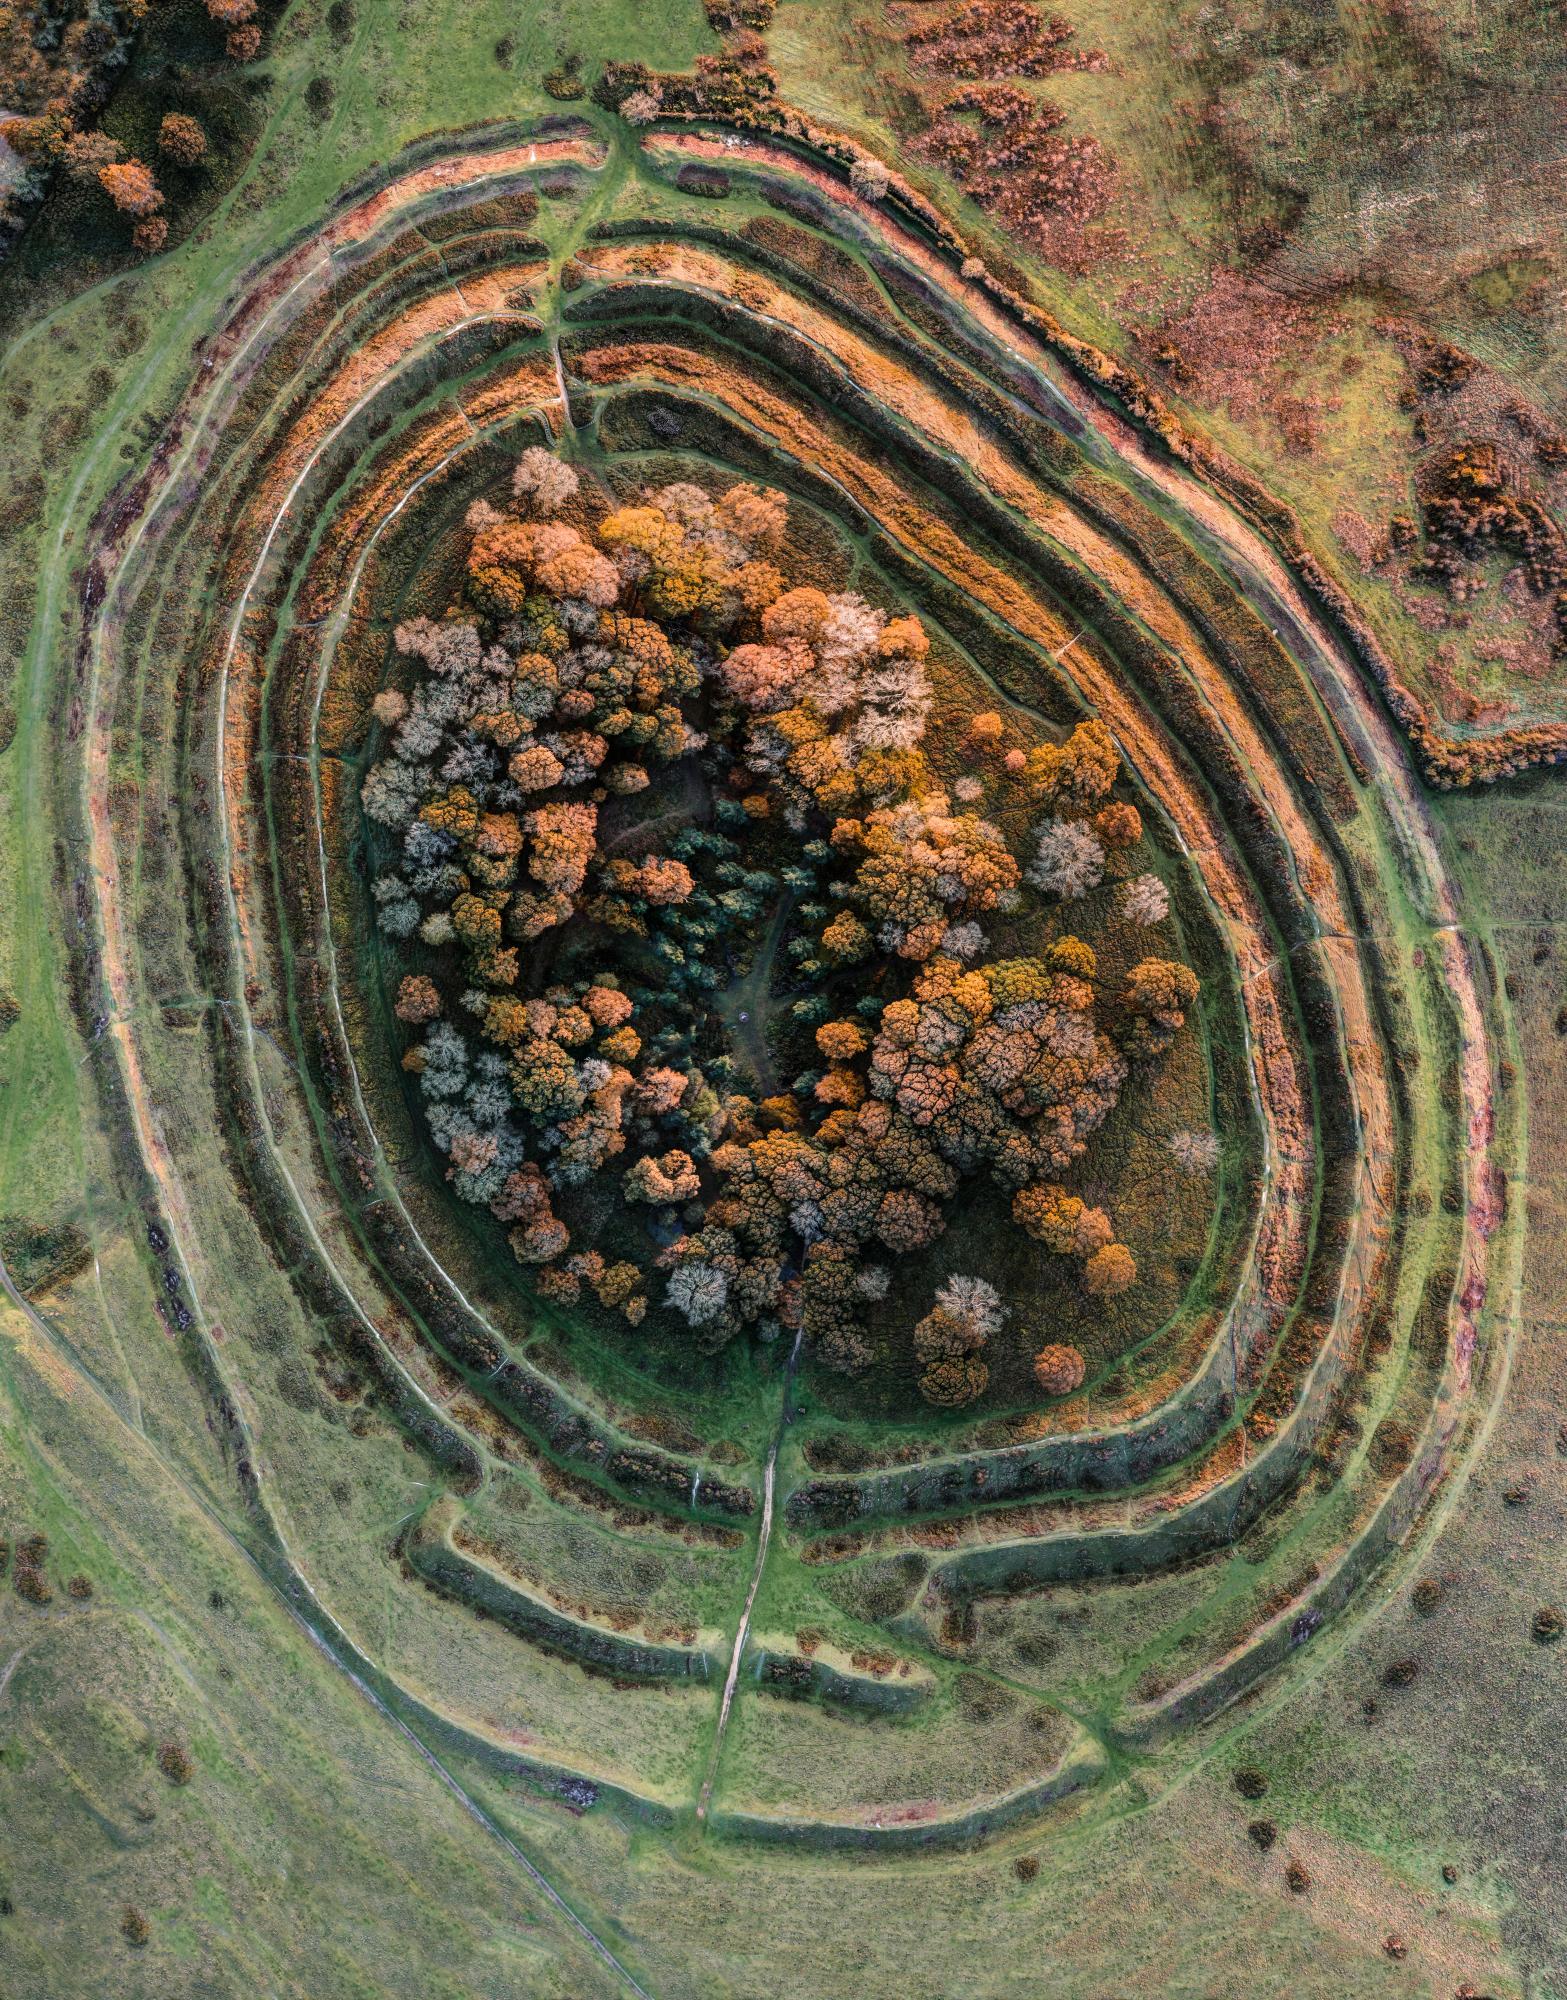 the iron age hillfort that makes people cry: david r abram’s best photograph